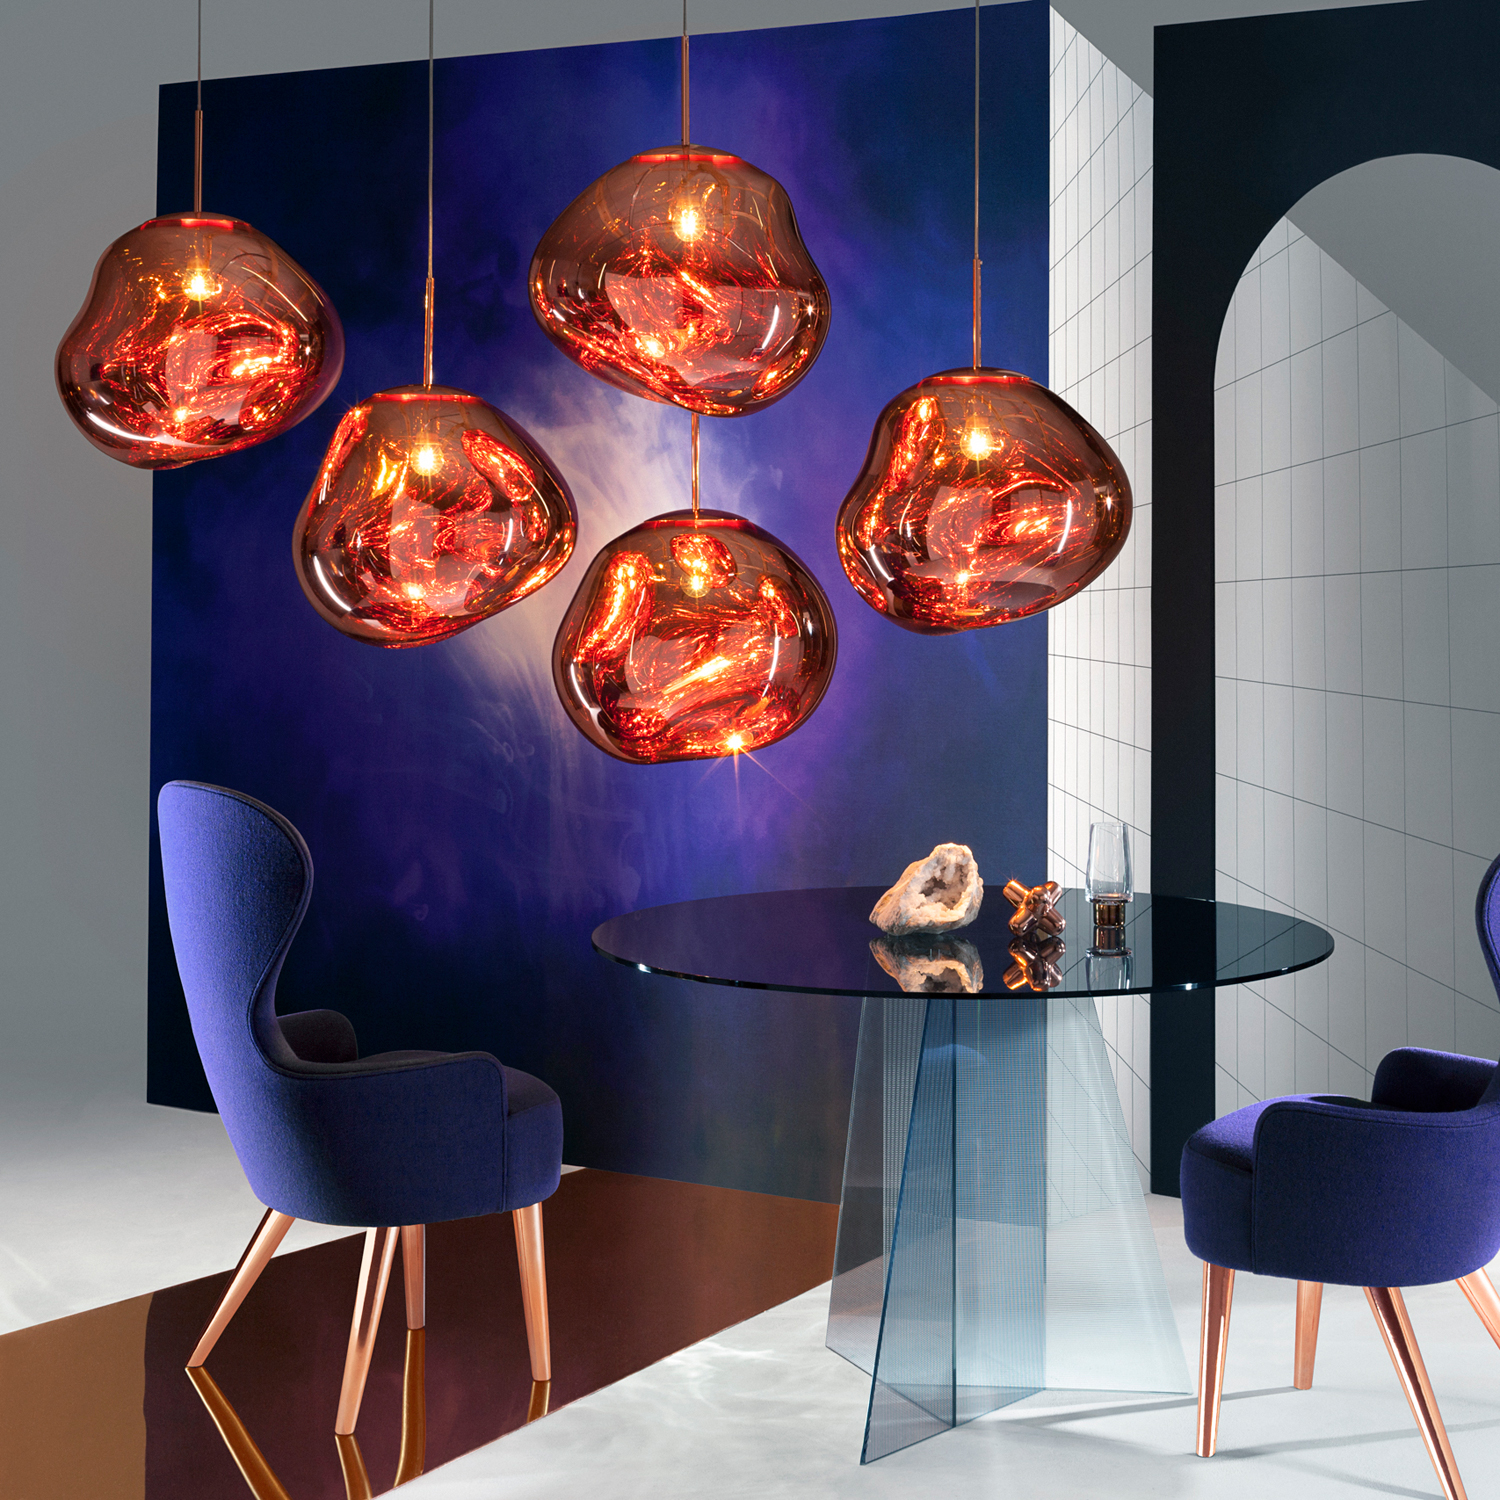 10 Stupendous Dining Room Lamps That Are The Epitome of Sophistication 6